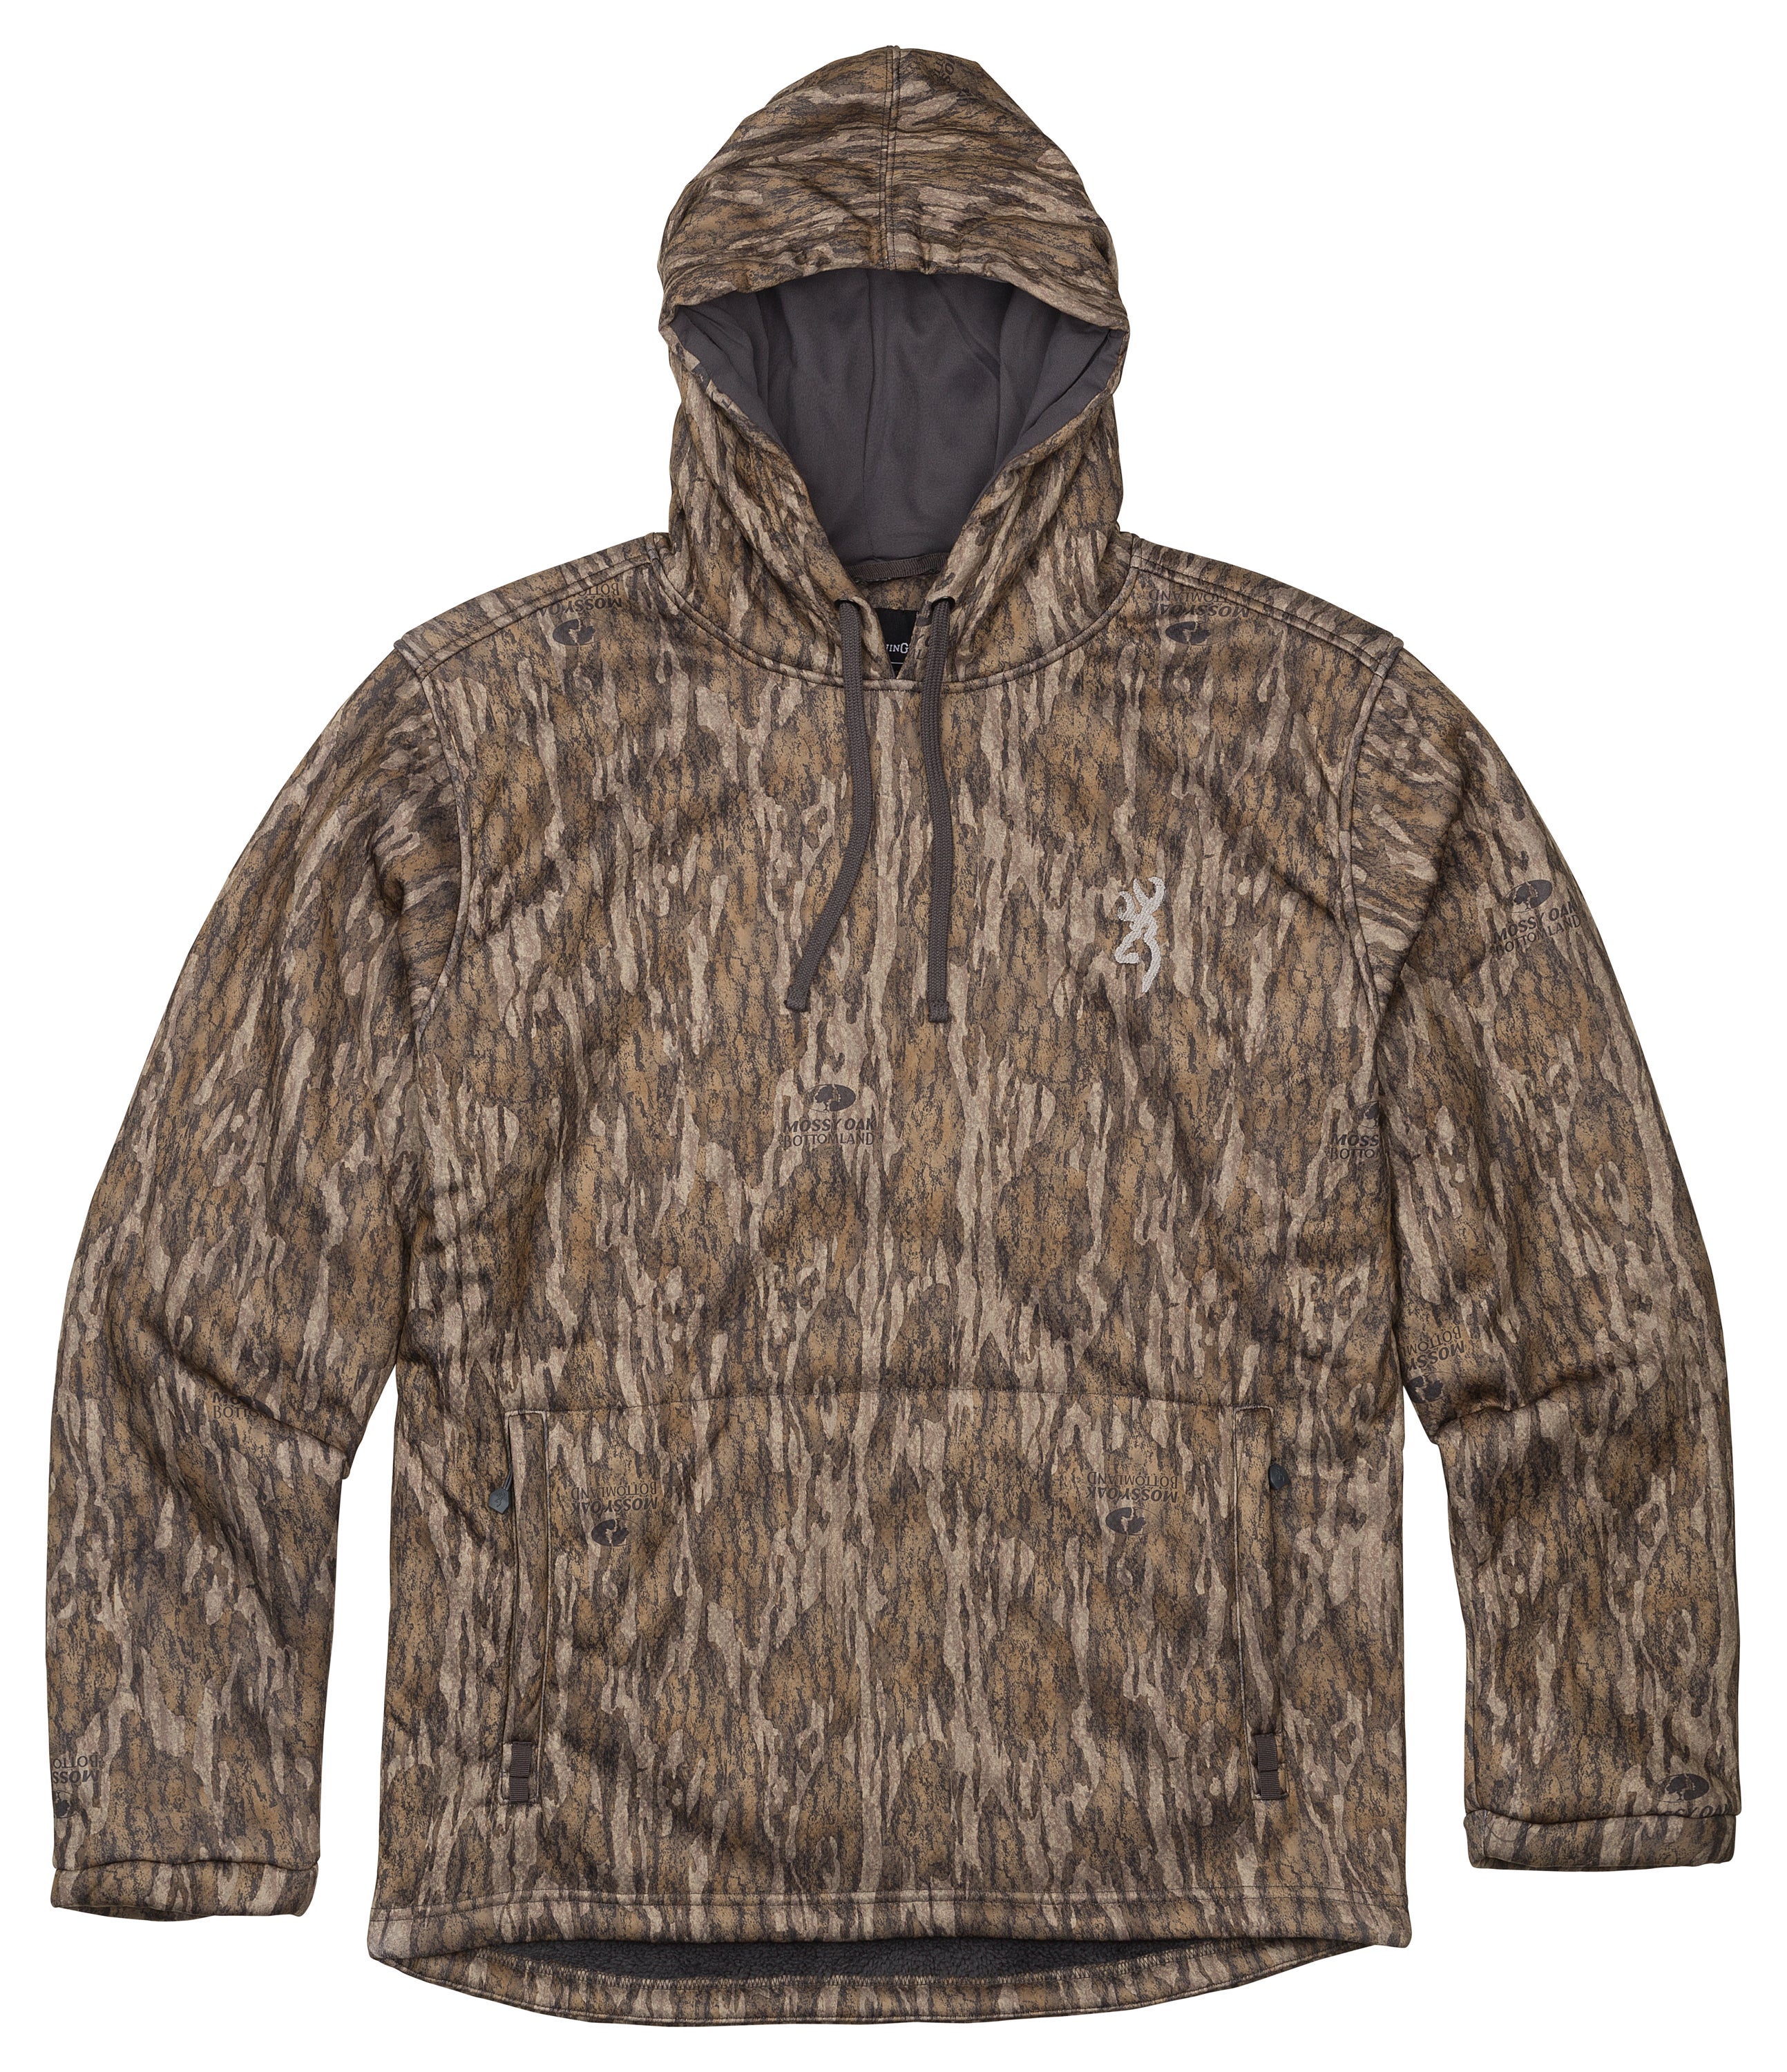 Details about   Browning Wicked Wing Soft Shell Pullover 3XL Duck Hunting Jacket Max-5 Camo 